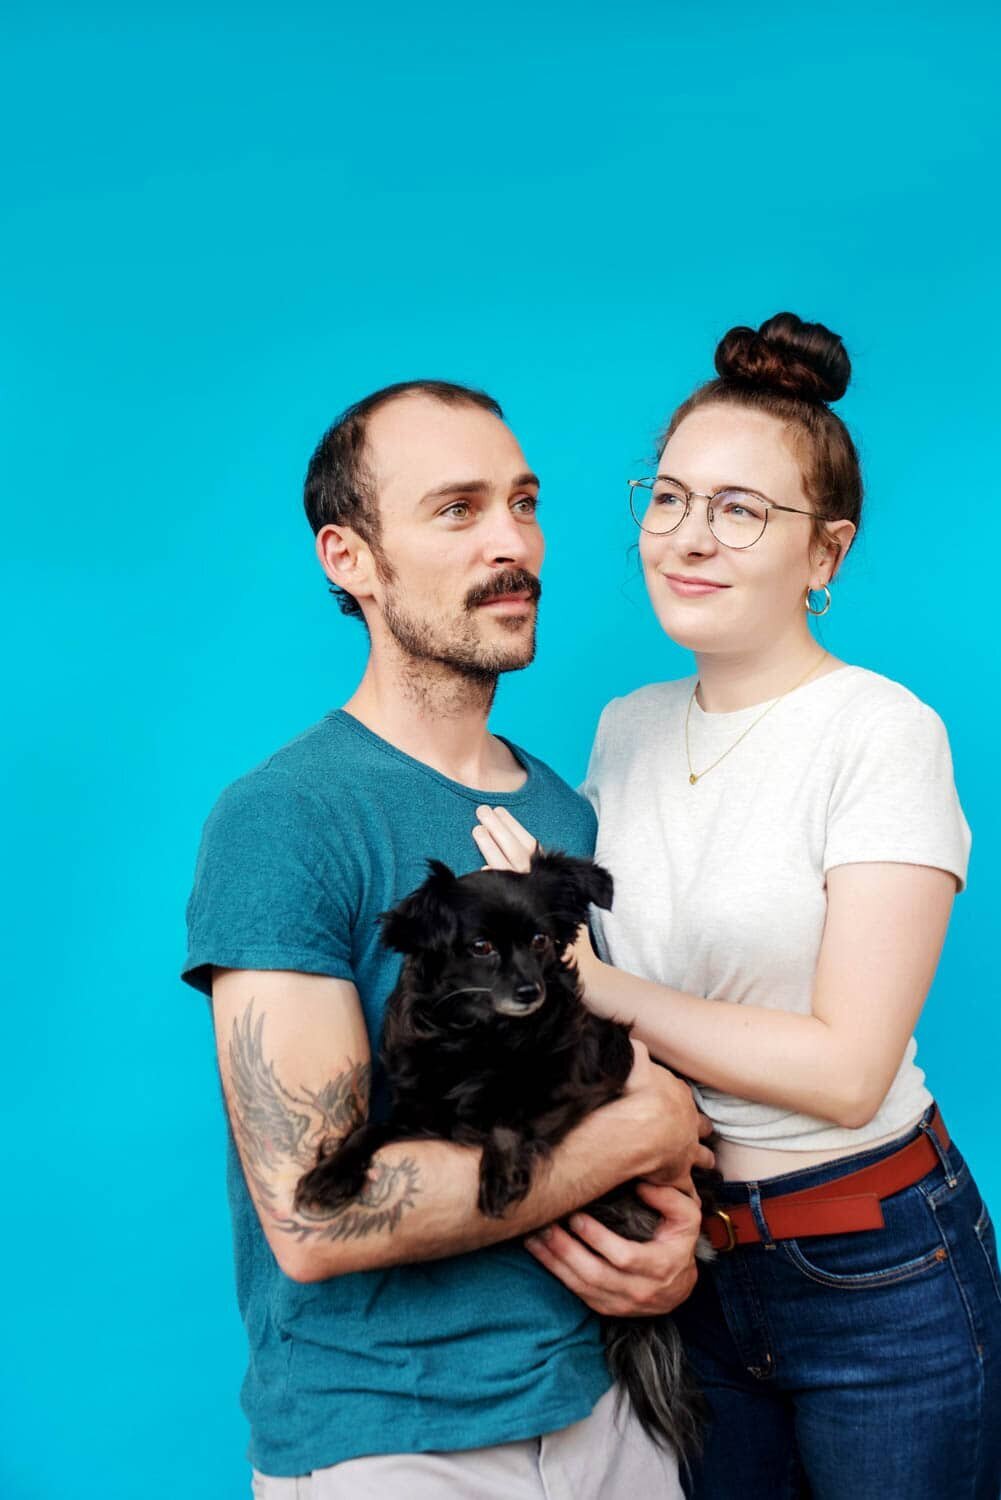 a man and woman holding a dog standing in front of a colorful bright blue background look in opposite directions